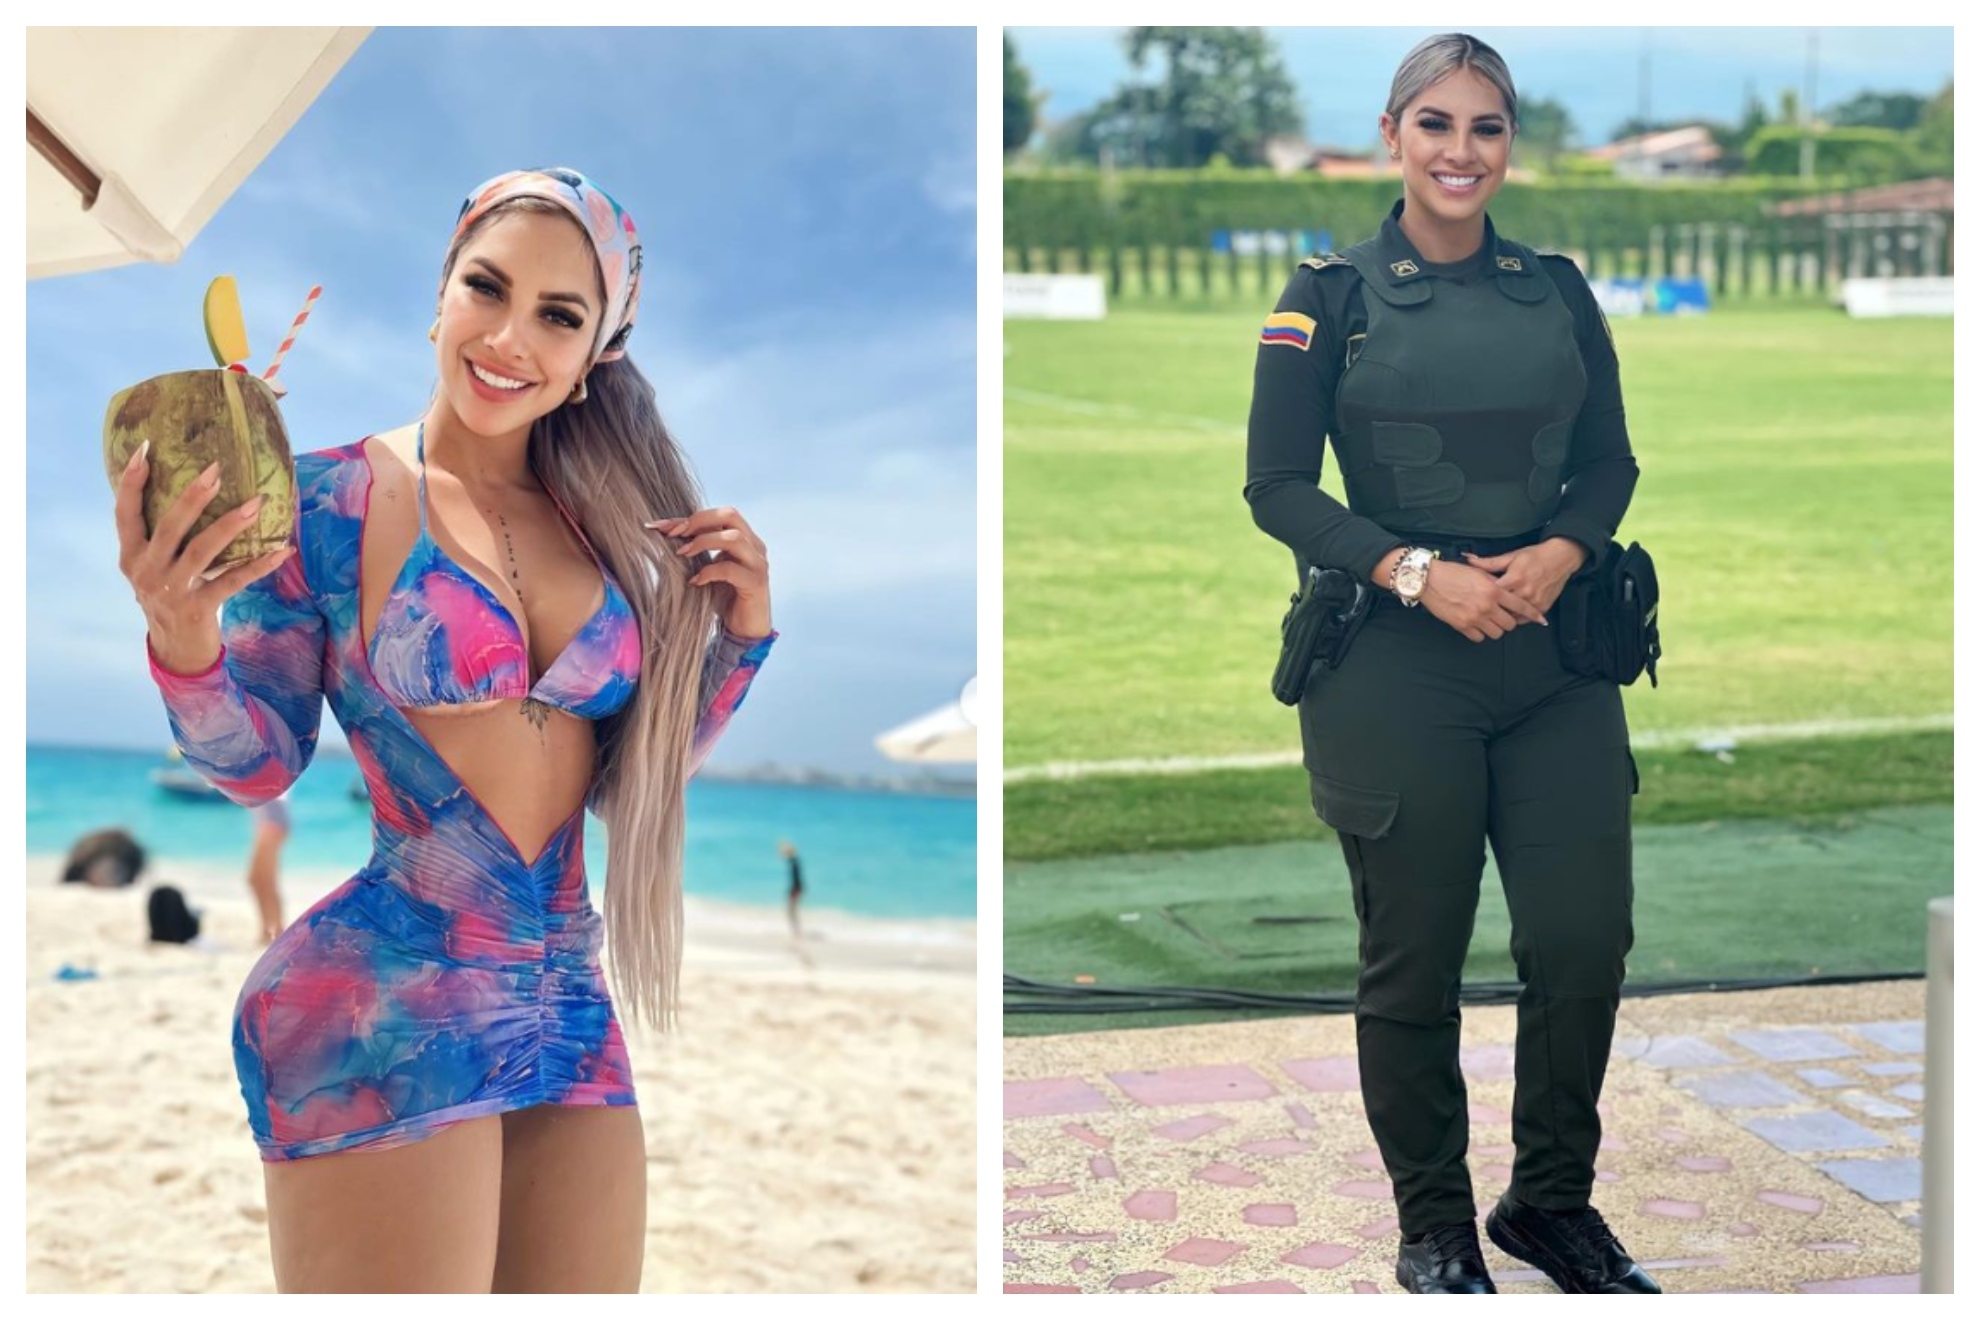 Meet Colombia's sexiest policewoman that steals the show at soccer games...